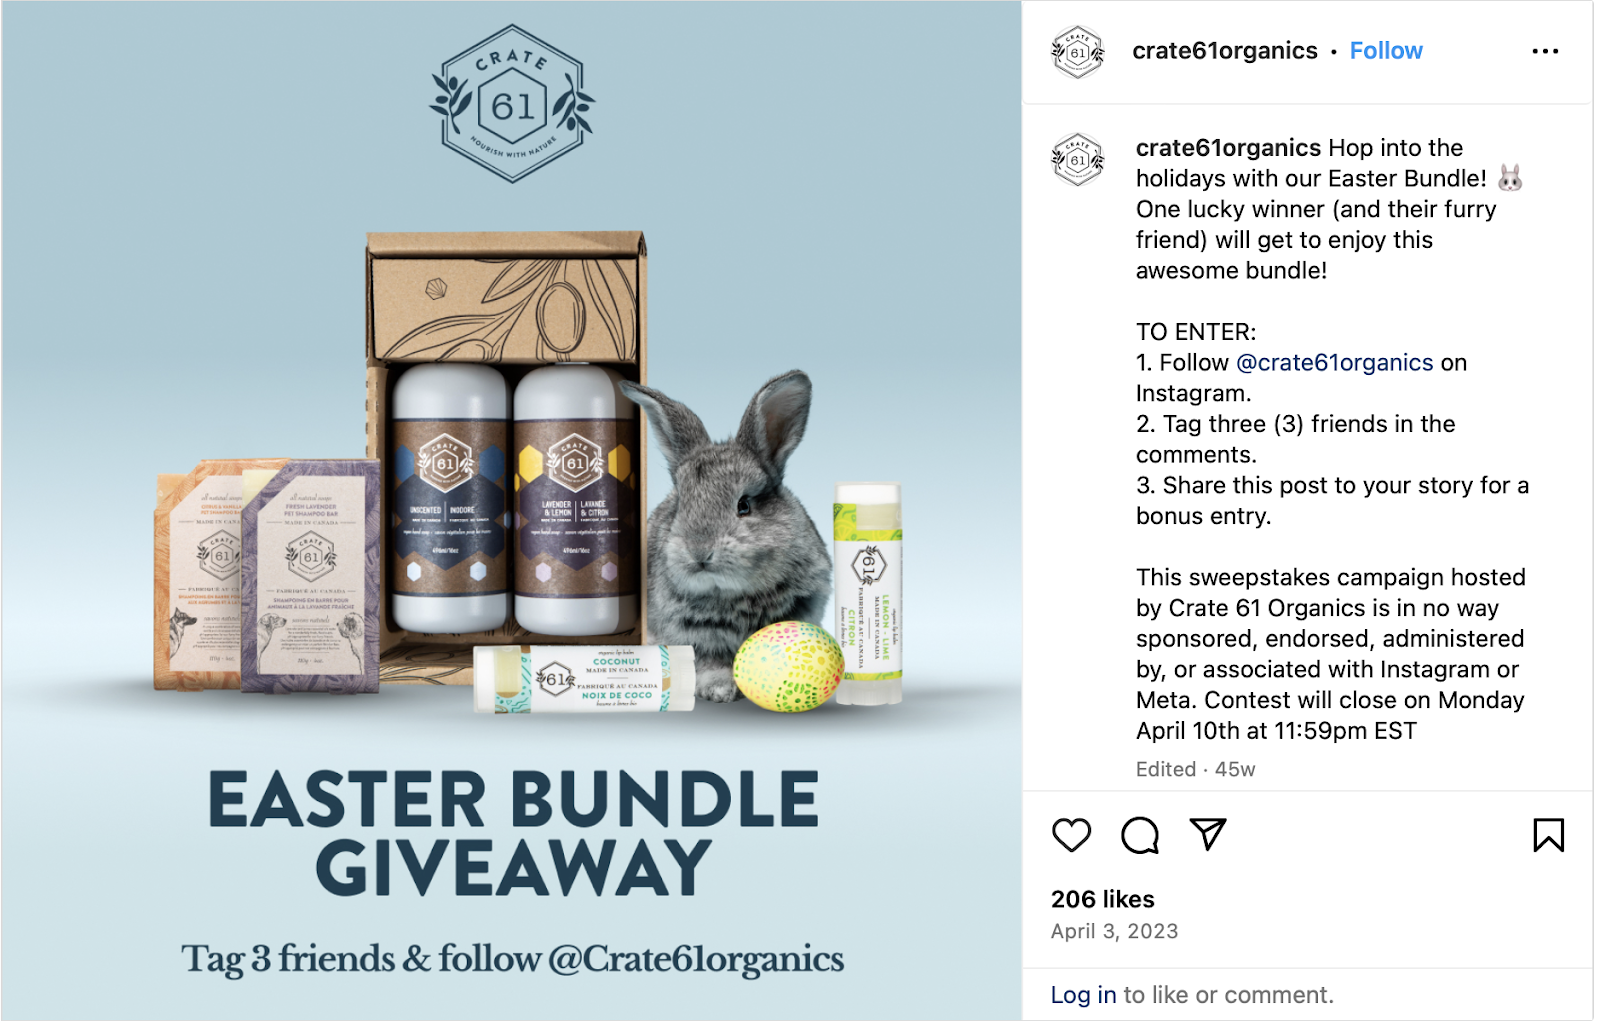 Easter marketing strategy example: Instagram screenshot of Easter Bundle Giveaway from Crate61organics featuring their products next to an image of a bunny and decorated egg